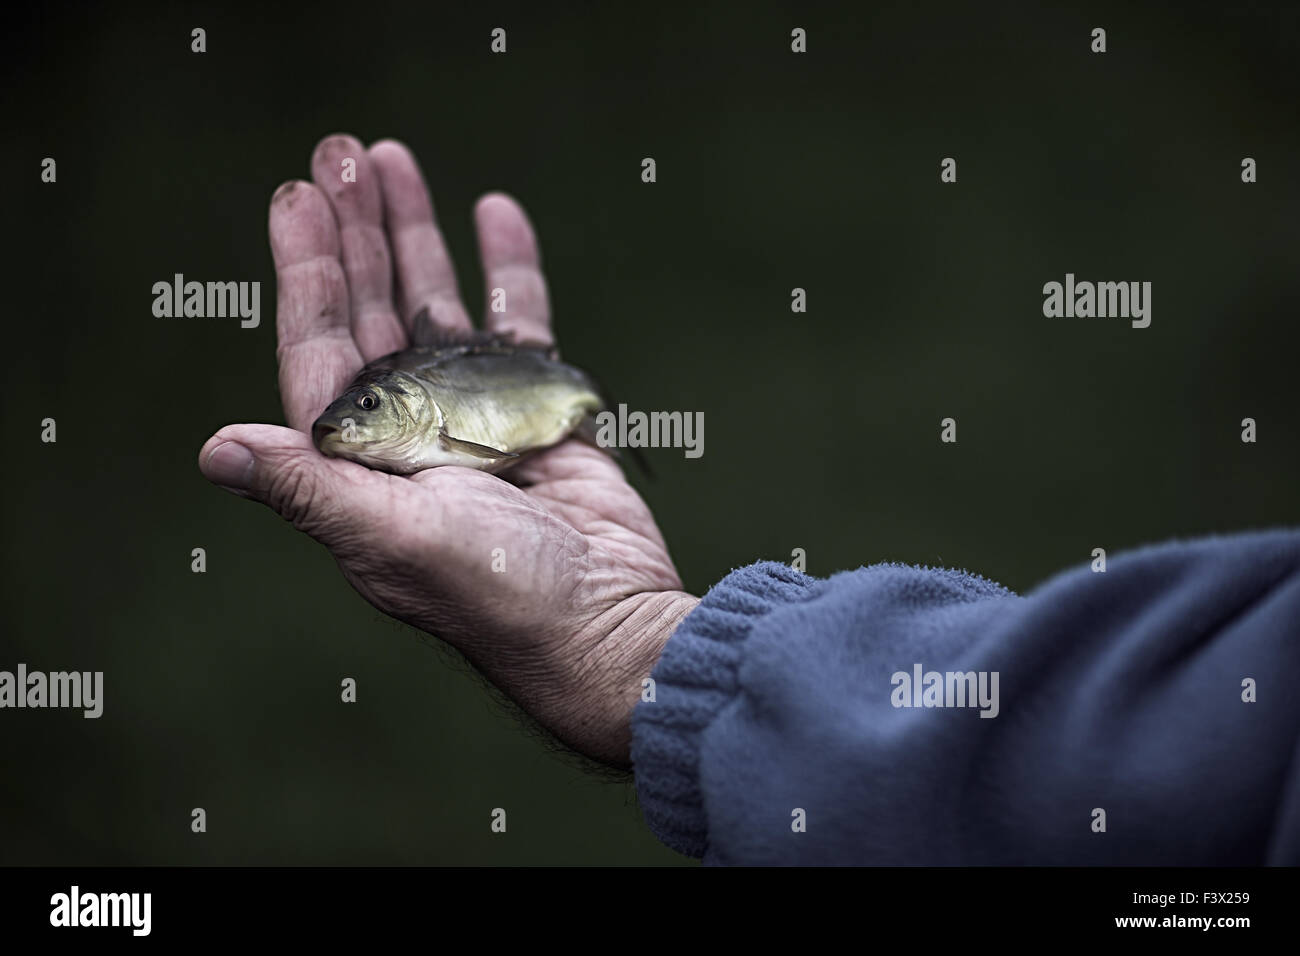 Small carp fish in the hand of a man Stock Photo